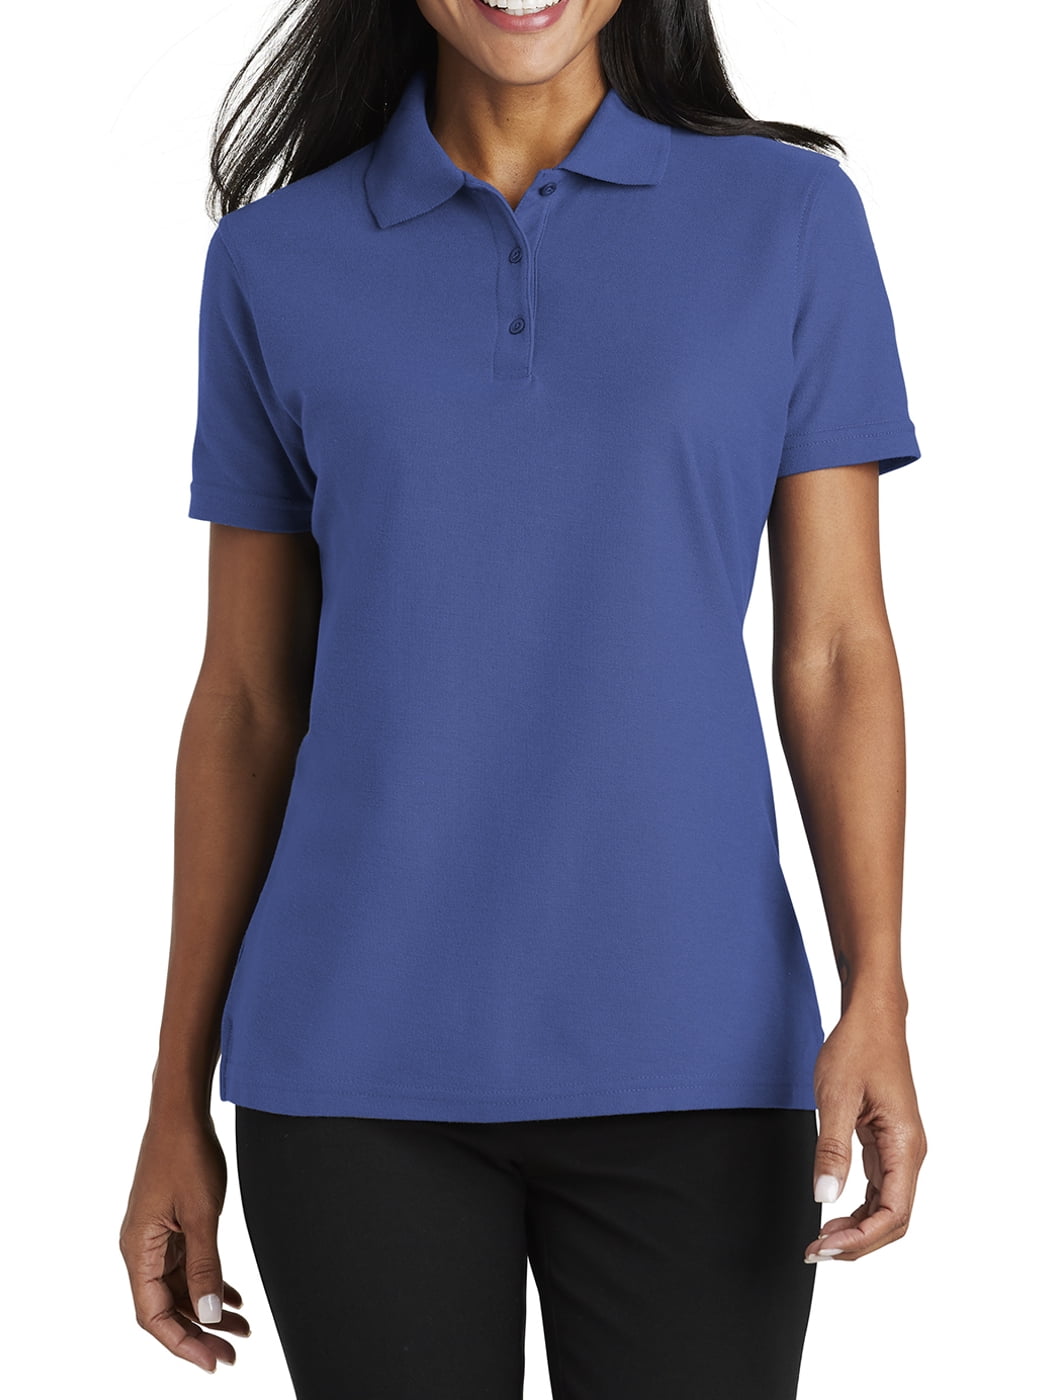 Mafoose - Mafoose Women's Stain-Release Polo T-Shirt Royal Large ...